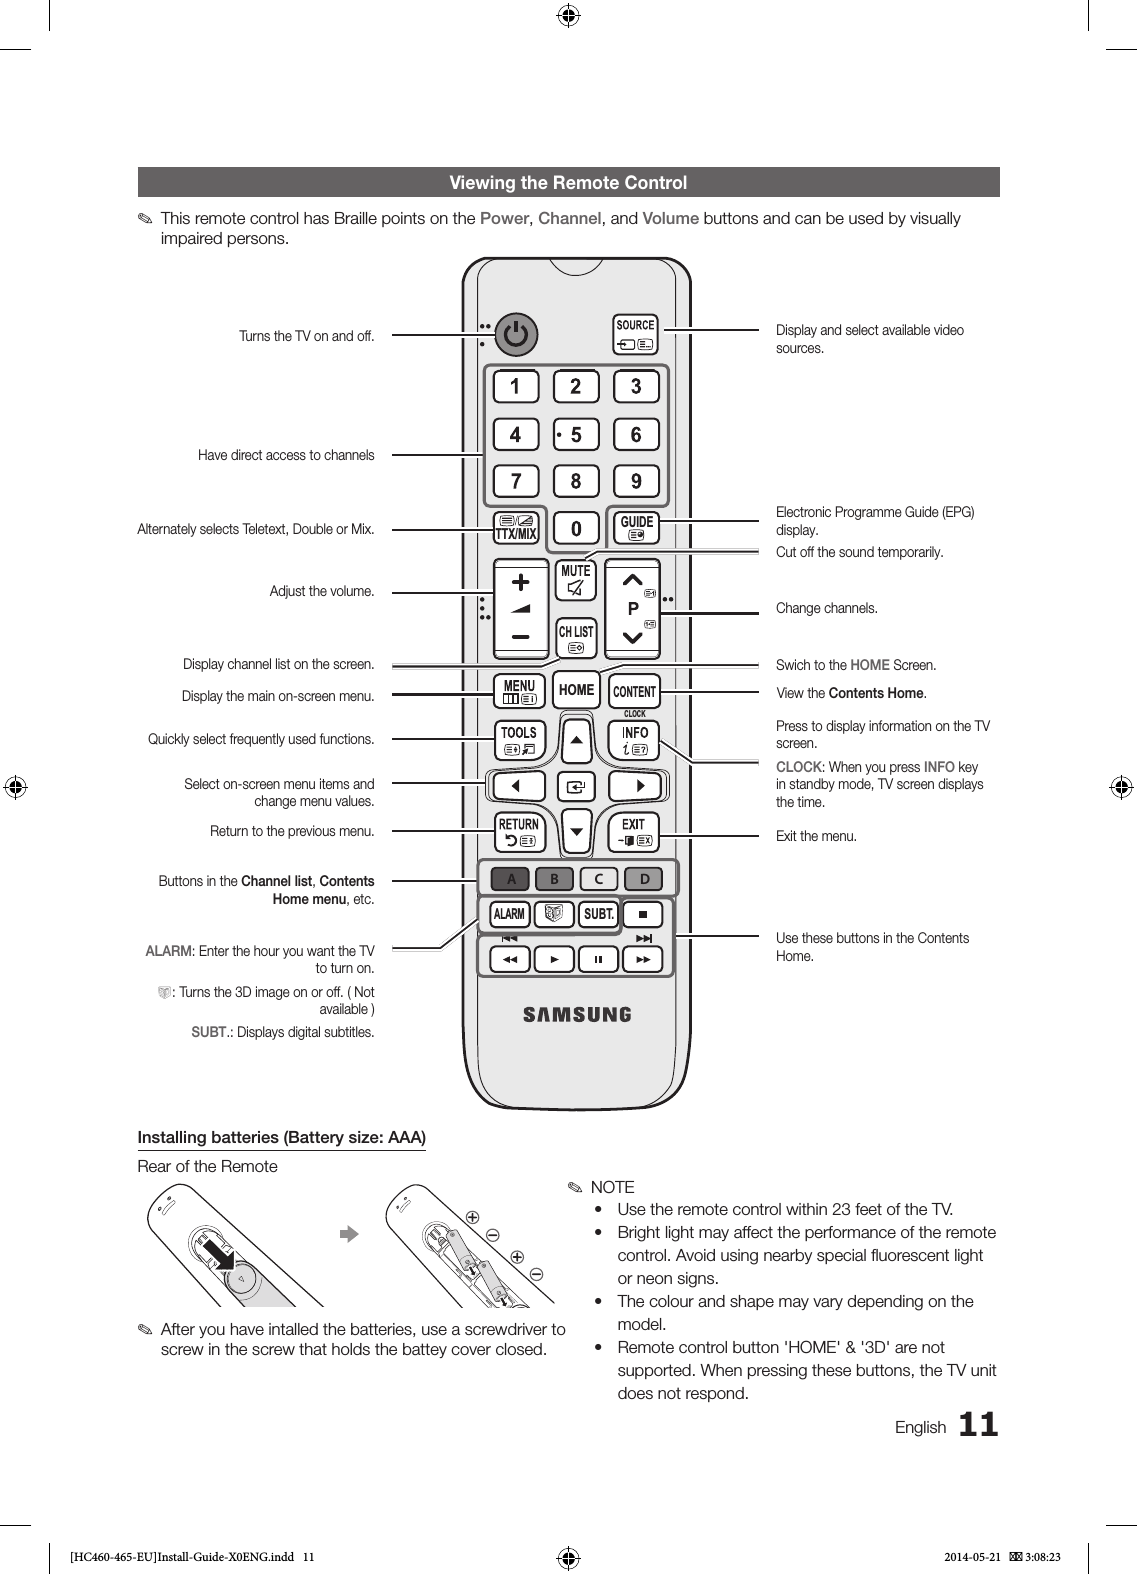 11EnglishViewing the Remote Control ✎This remote control has Braille points on the Power, Channel, and Volume buttons and can be used by visually impaired persons.Installing batteries (Battery size: AAA)Rear of the Remote ✎After you have intalled the batteries, use a screwdriver to screw in the screw that holds the battey cover closed. ✎NOTE• Use the remote control within 23 feet of the TV.• Bright light may affect the performance of the remote control. Avoid using nearby special ﬂuorescent light or neon signs.• The colour and shape may vary depending on the model.• Remote control button &apos;HOME&apos; &amp; &apos;3D&apos; are not supported. When pressing these buttons, the TV unit does not respond.GUIDECONTENTCLOCKALARMABCDALARMSUBT.CLOCKGUIDECONTENTHOMECH LISTTTX/MIXTurns the TV on and off.Have direct access to channelsAlternately selects Teletext, Double or Mix.Adjust the volume.Display channel list on the screen.Display the main on-screen menu.Quickly select frequently used functions. Select on-screen menu items and change menu values.Return to the previous menu.Buttons in the Channel list, Contents Home menu, etc.Use these buttons in the Contents Home.Display and select available video sources.Electronic Programme Guide (EPG) display.Cut off the sound temporarily.Change channels.Swich to the HOME Screen.View the Contents Home.Press to display information on the TV screen. CLOCK: When you press INFO key in standby mode, TV screen displays the time.Exit the menu.ALARM: Enter the hour you want the TV to turn on.W: Turns the 3D image on or off. ( Not available )SUBT.: Displays digital subtitles.[HC460-465-EU]Install-Guide-X0ENG.indd   11 2014-05-21    3:08:23